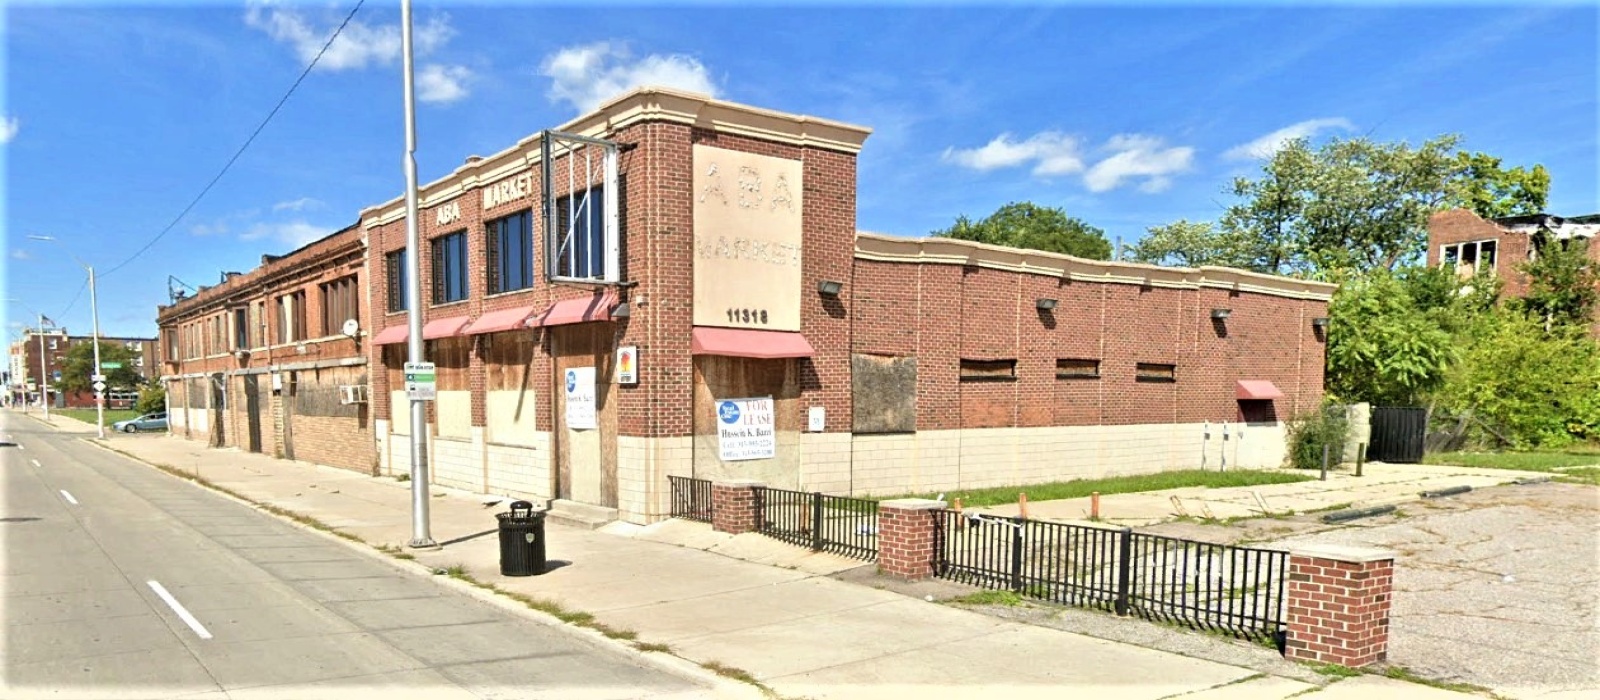 11318, Detroit, Michigan 48202, ,Office,For Sale or Lease,11318,1039